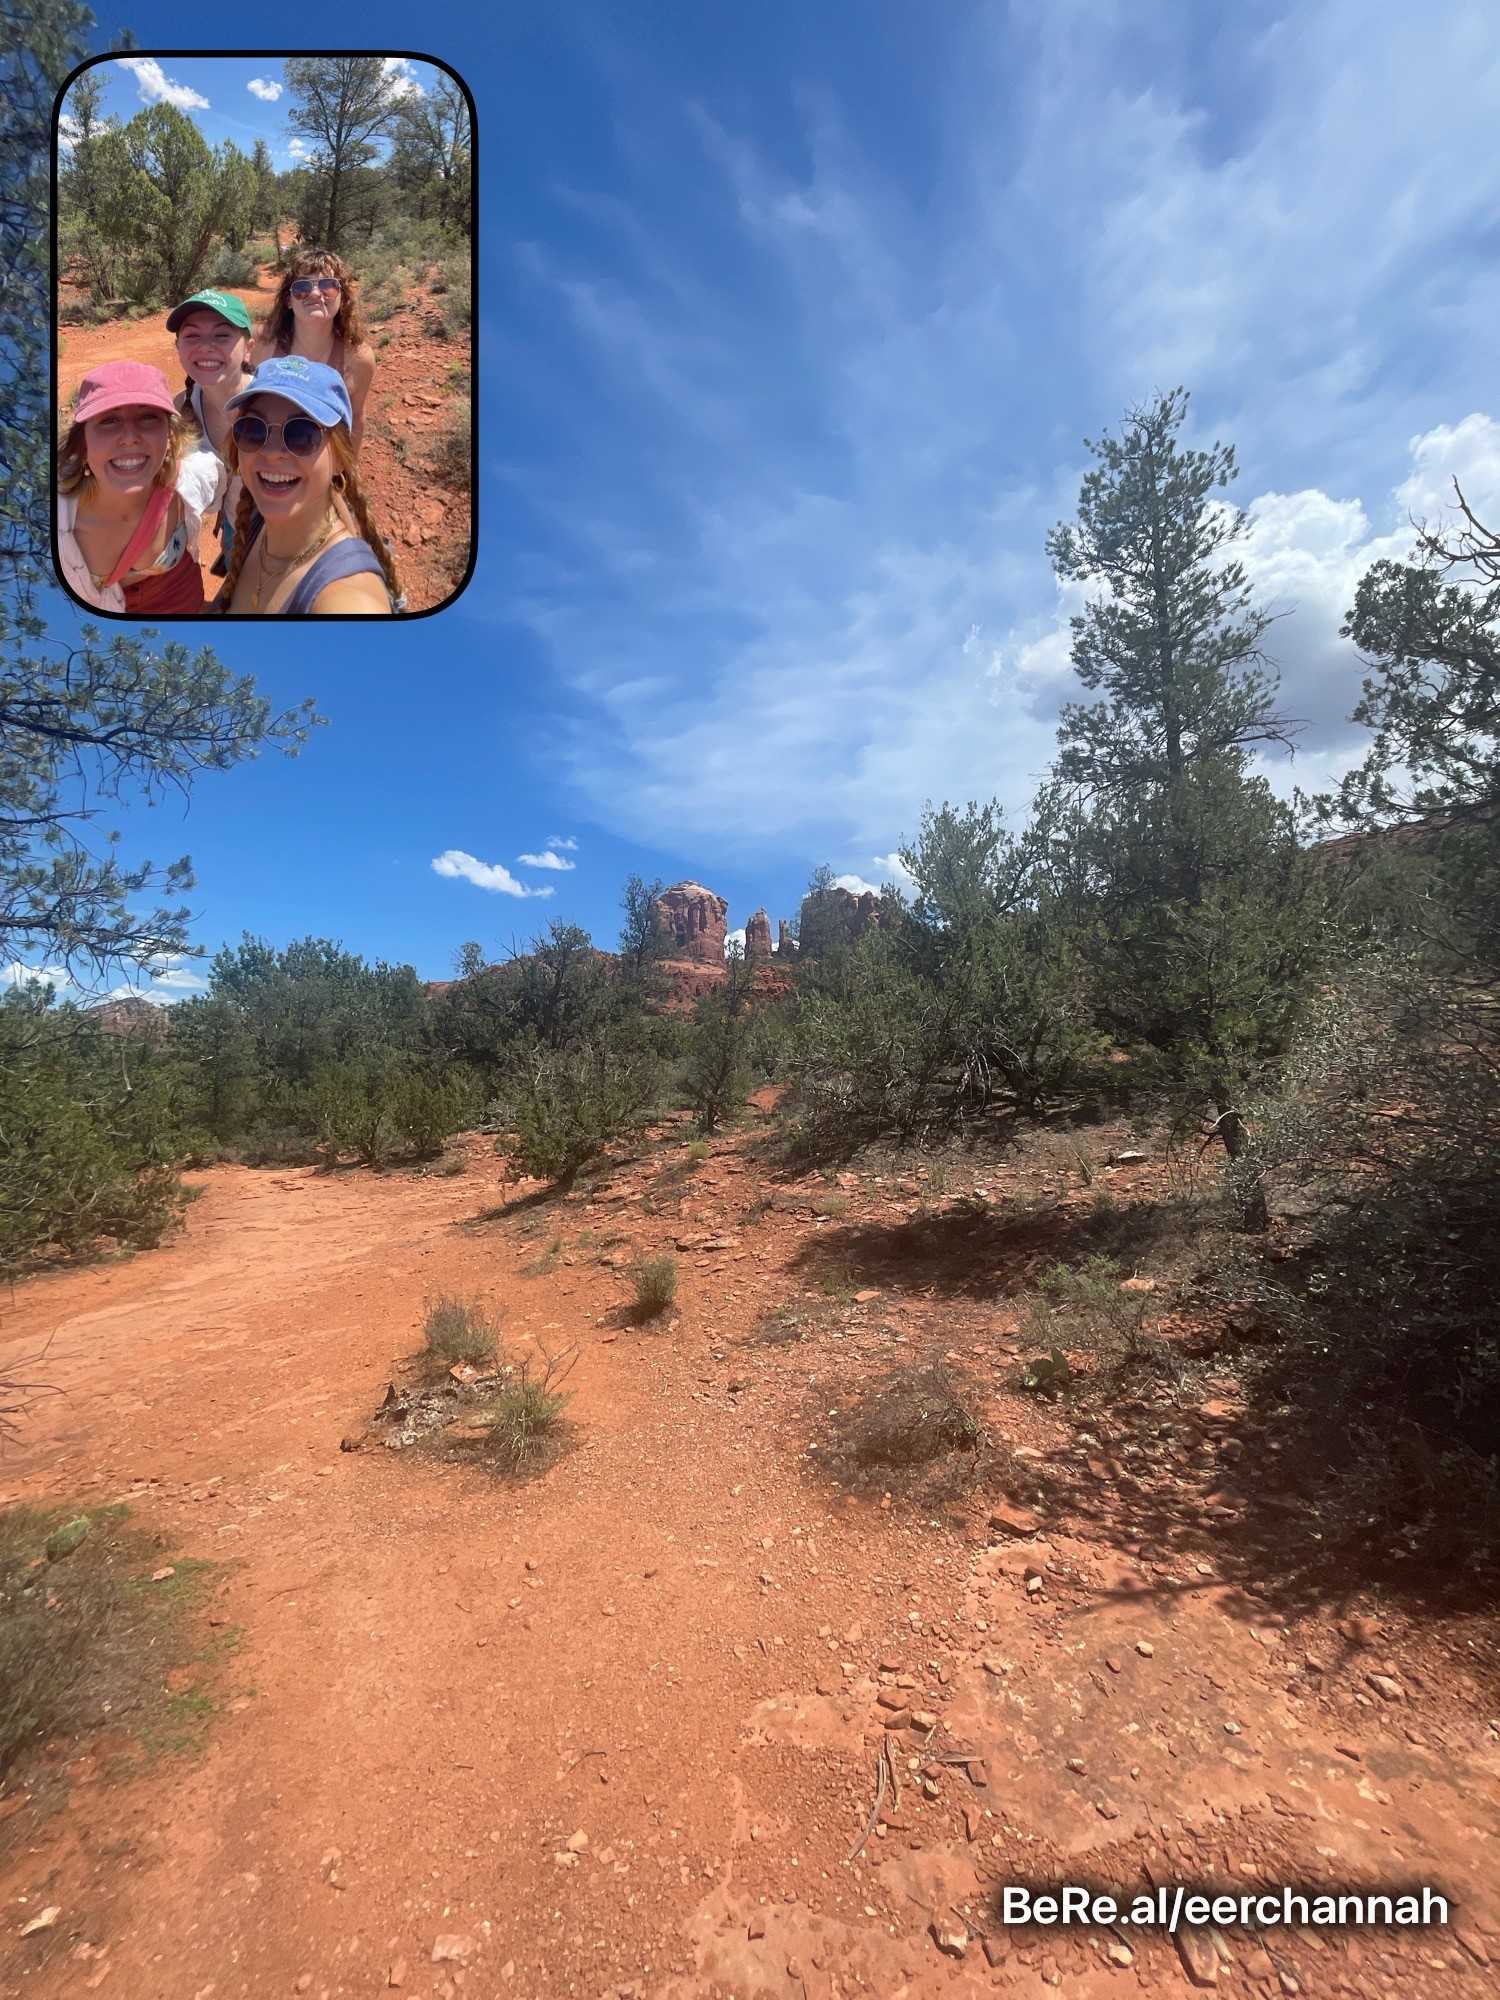 Hannah was hiking with friends when she got the notification to post. Photo courtesy of Hannah Cree. 